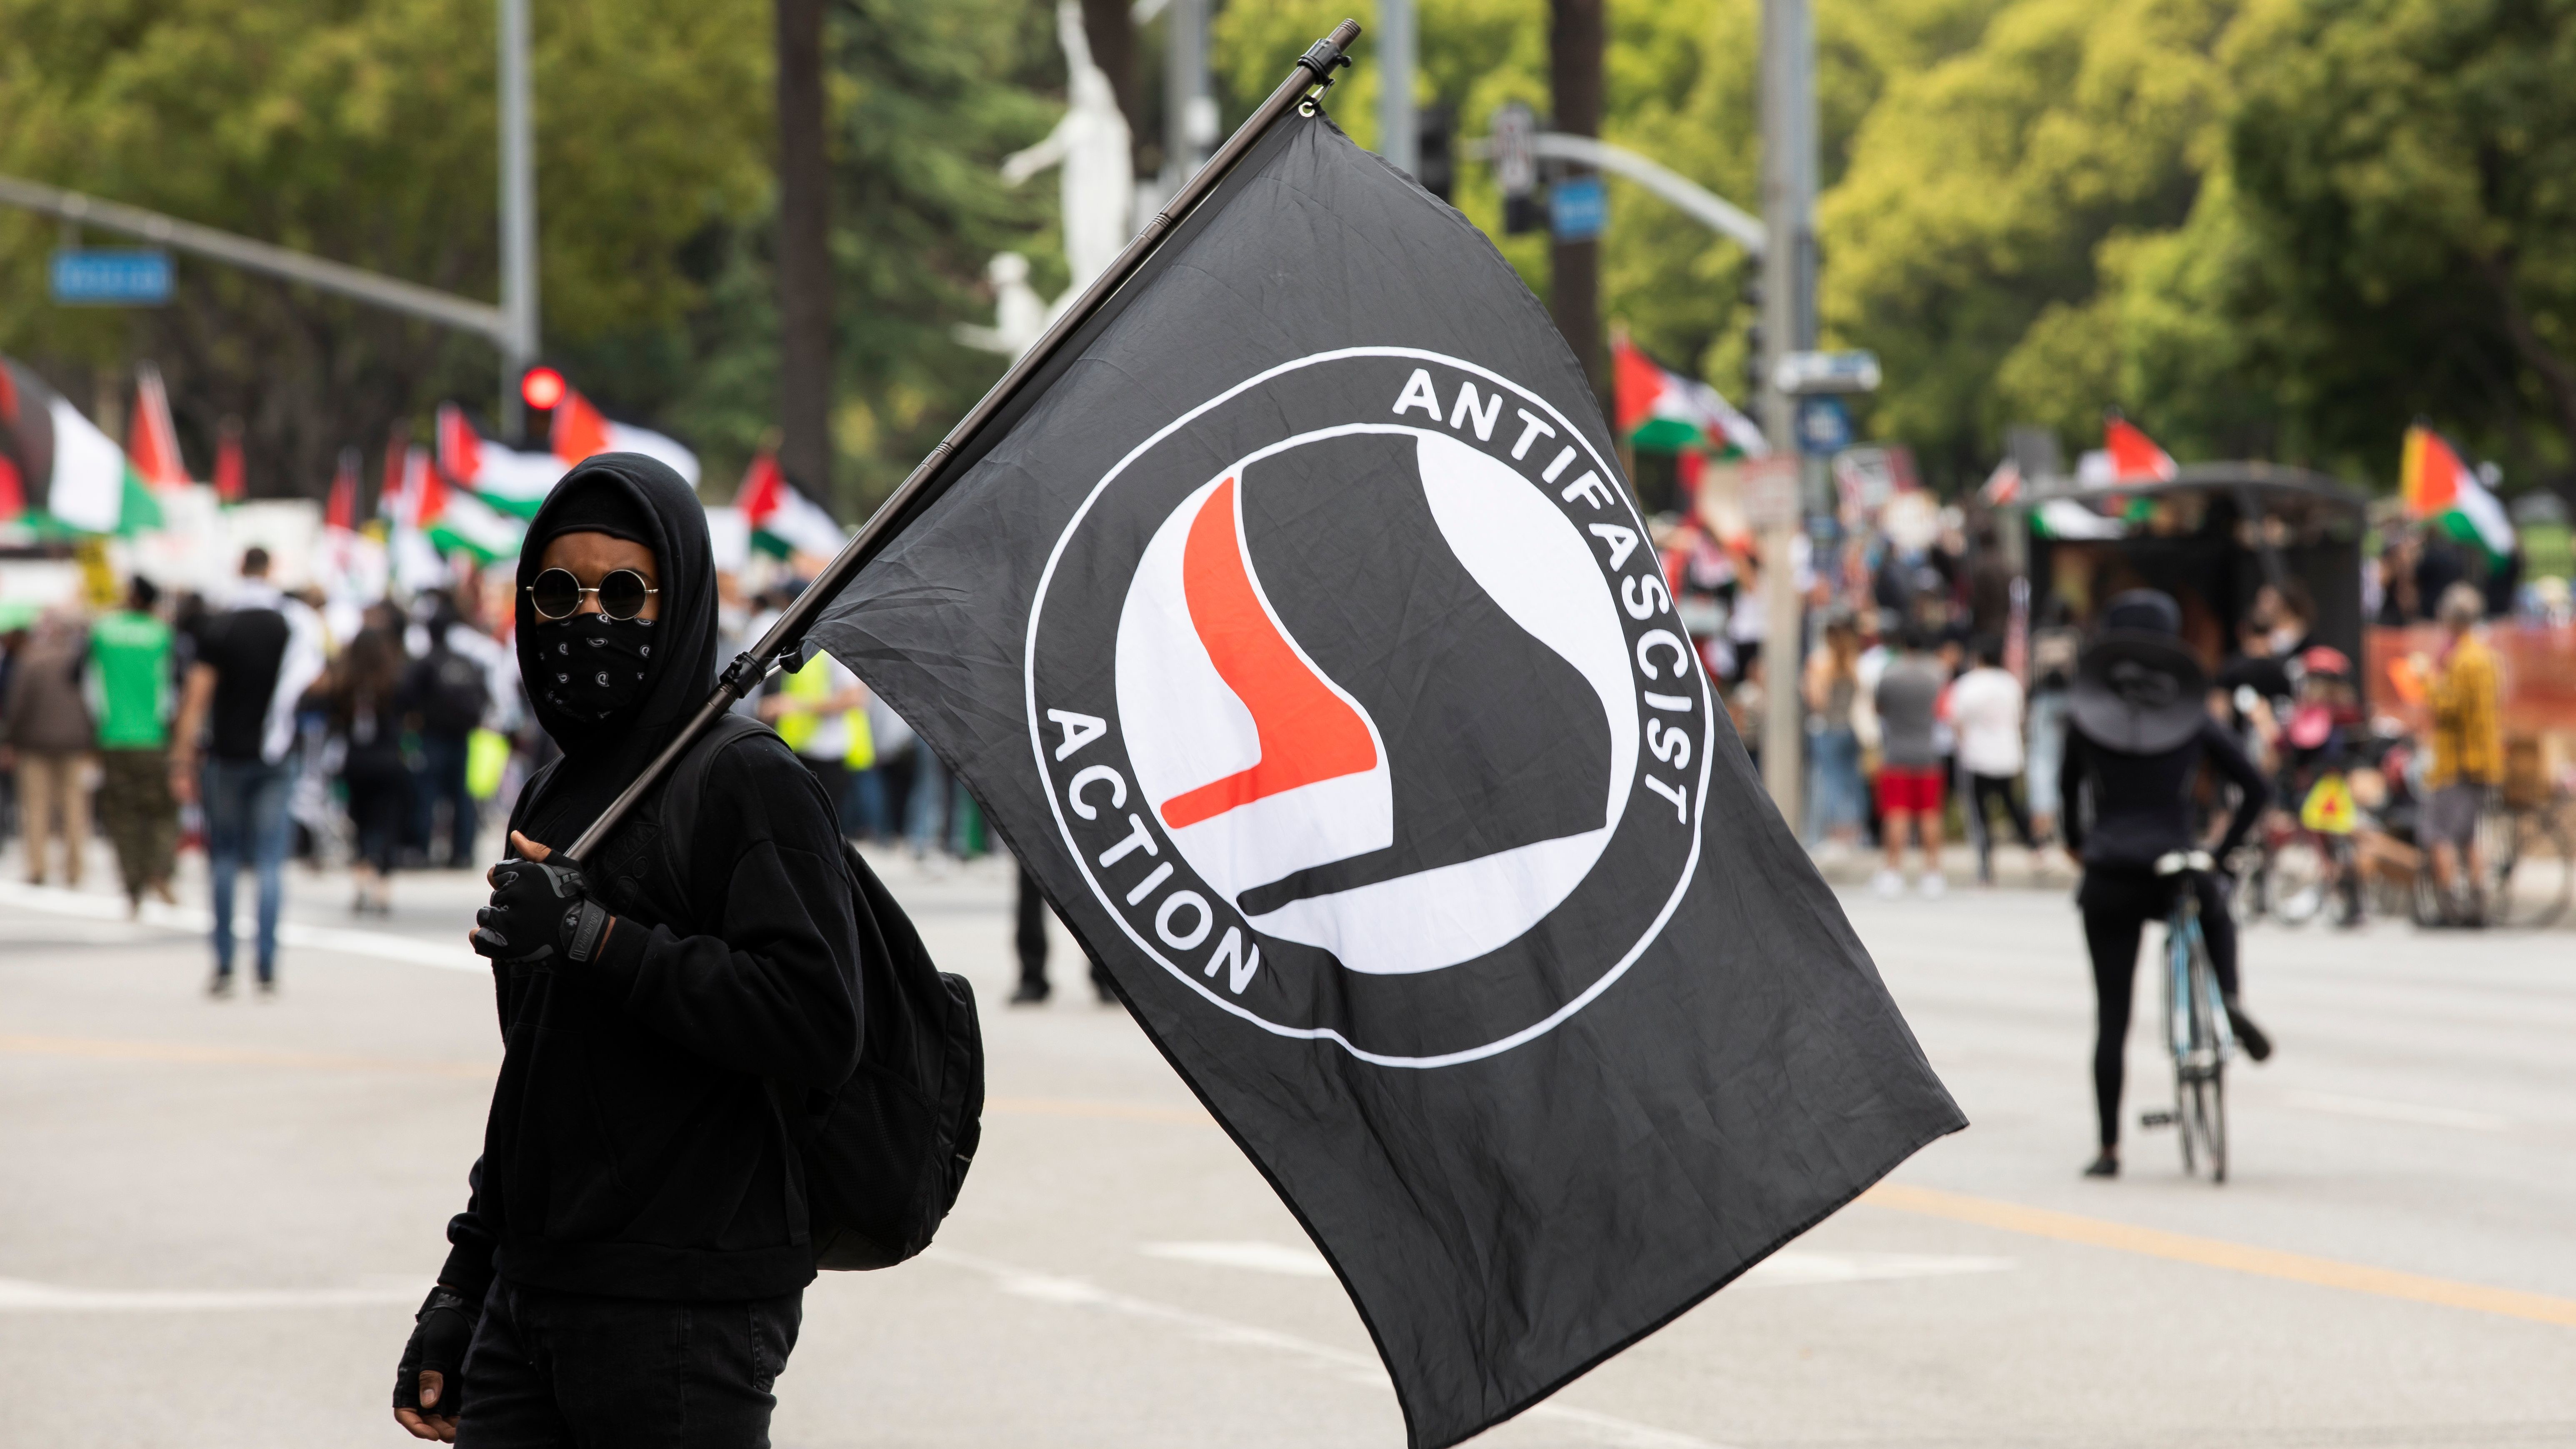 ShutterStock - Los Angeles, California, USA - May 15, 2021: An Antifa member carries a flag during a protest.